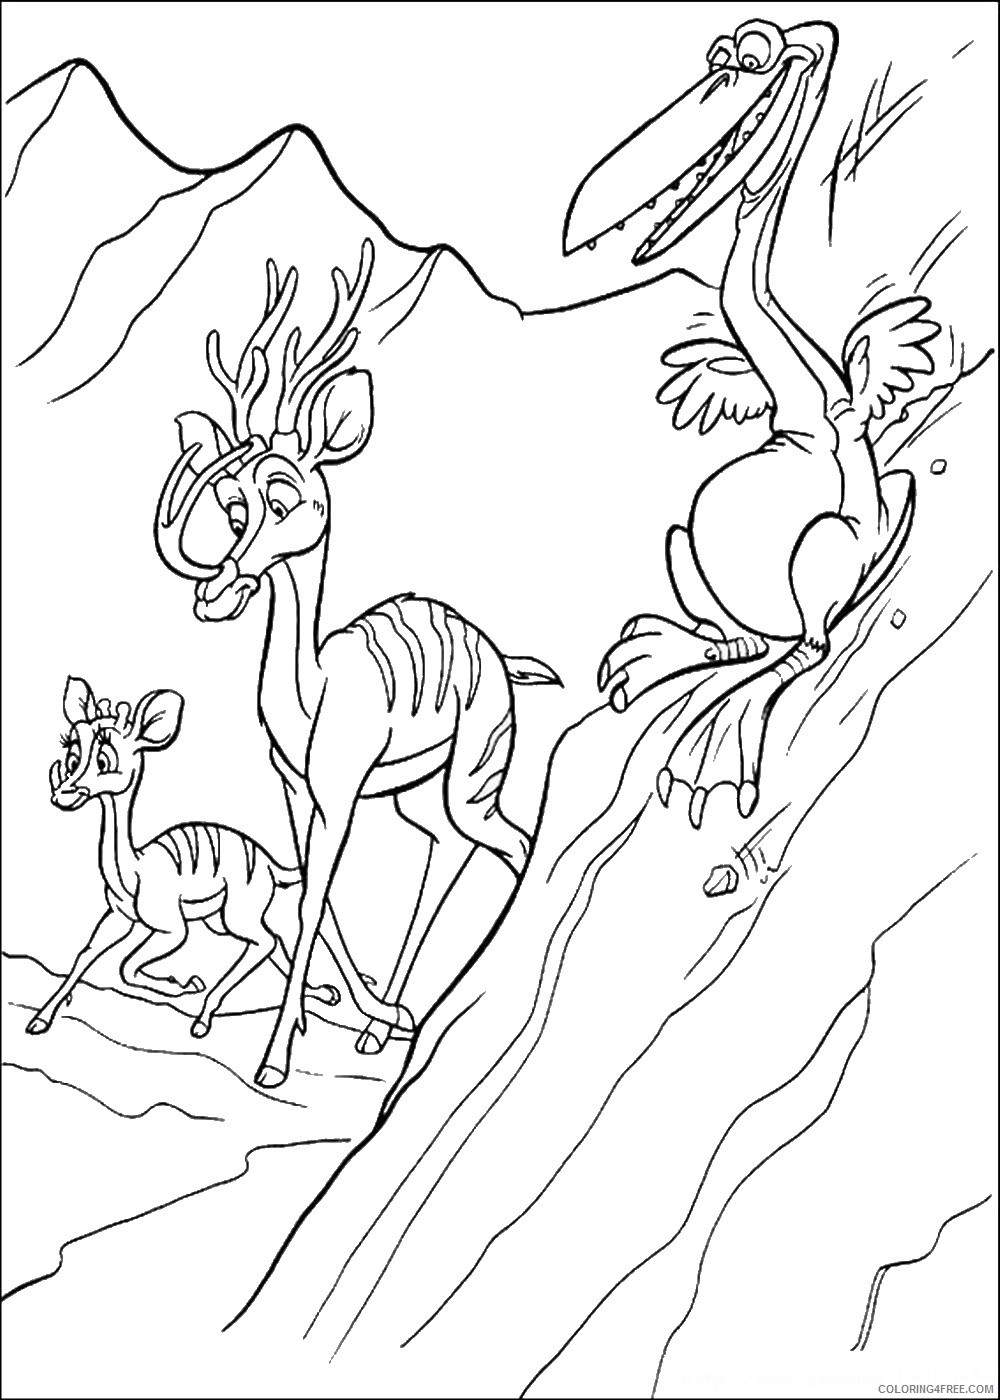 Ice Age Coloring Pages Cartoons ice age 17 Printable 2020 3386 Coloring4free